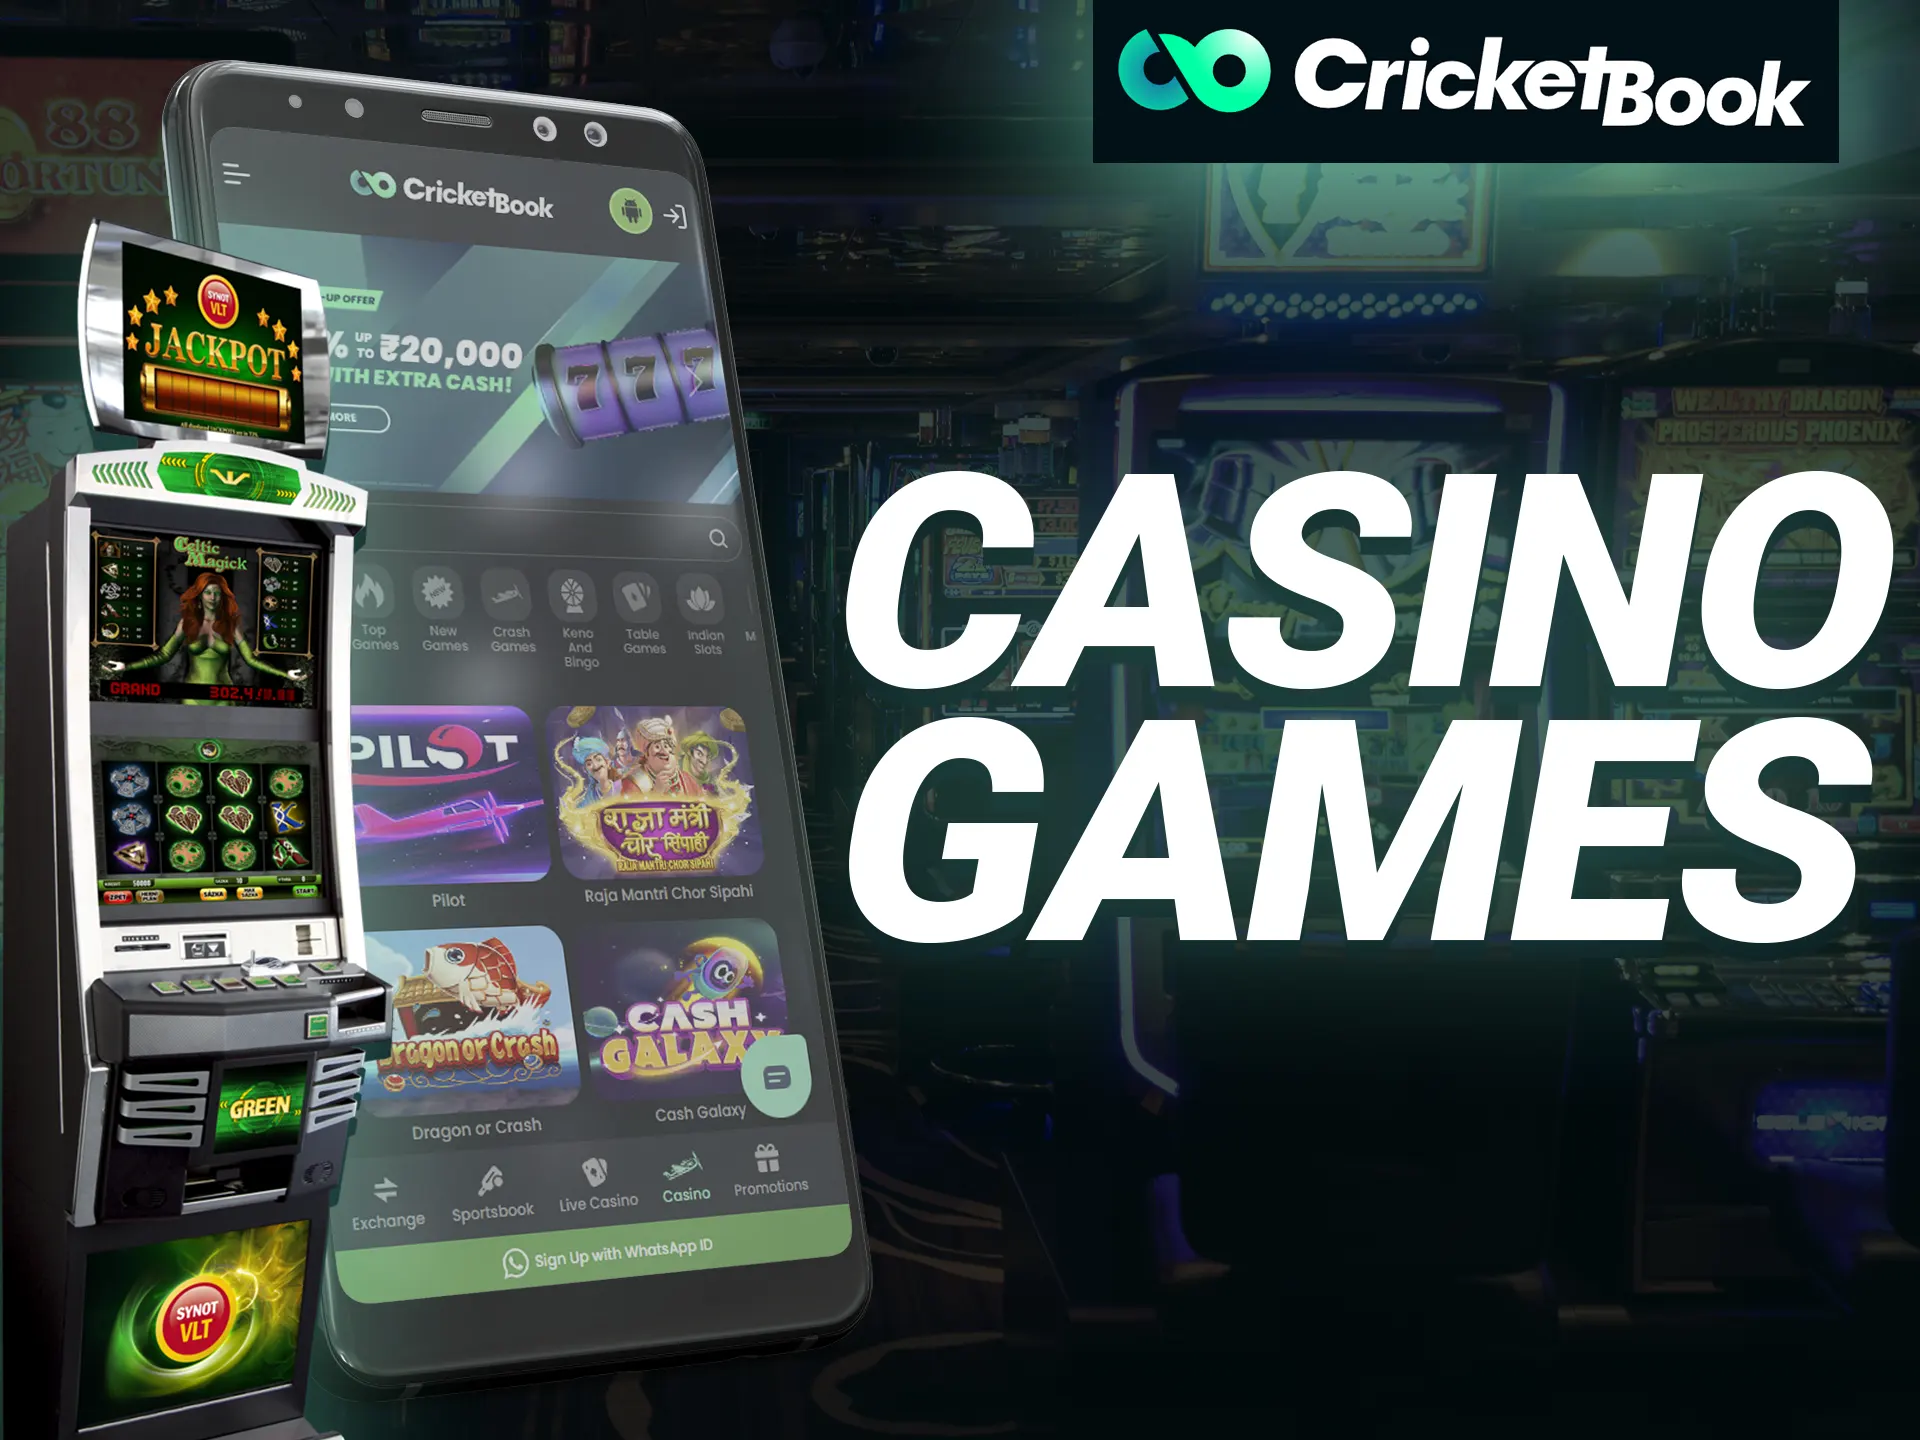 Cricketbook provides a wide range of casino games.